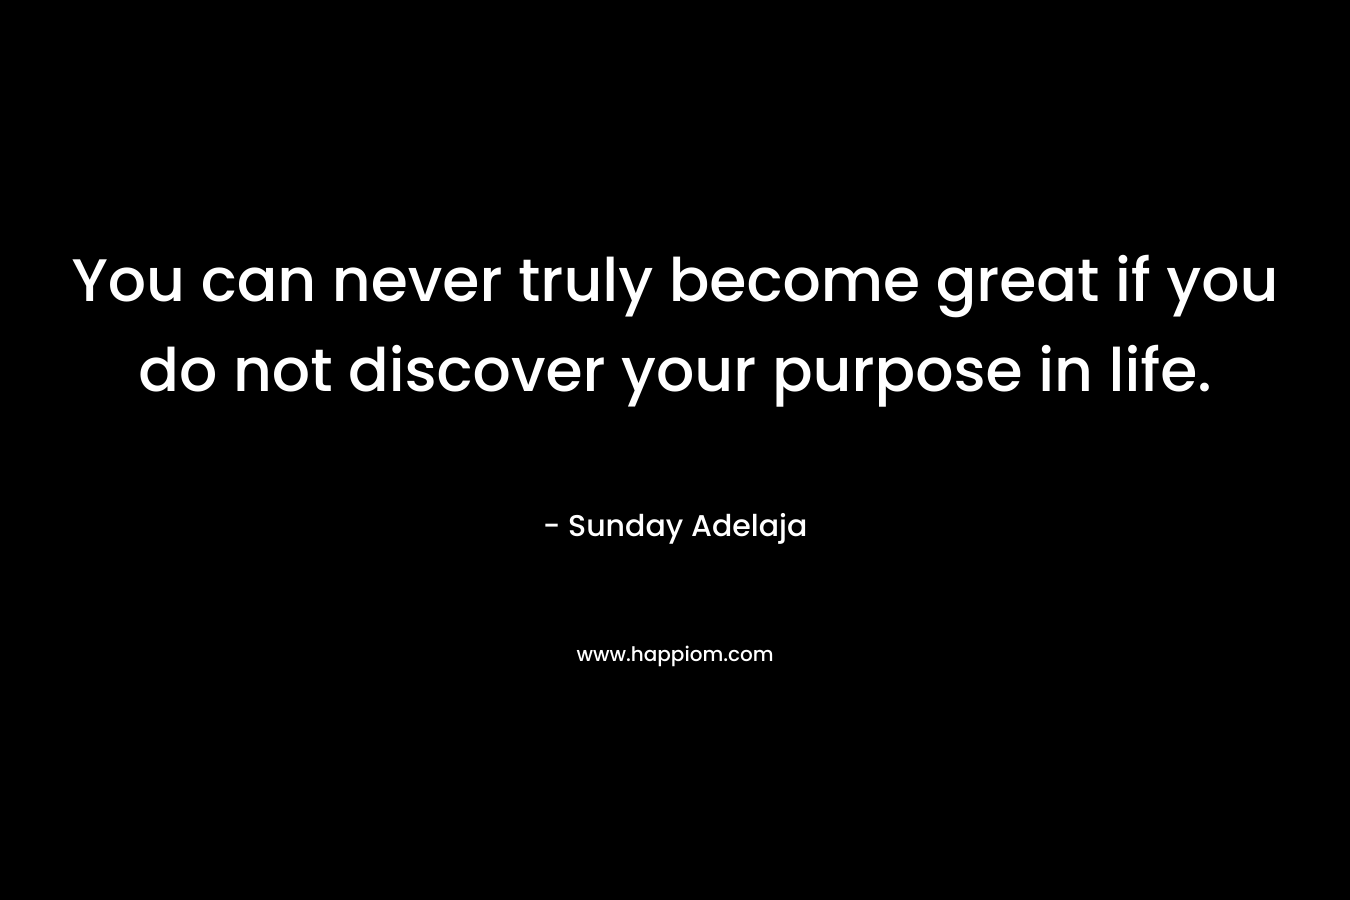 You can never truly become great if you do not discover your purpose in life.